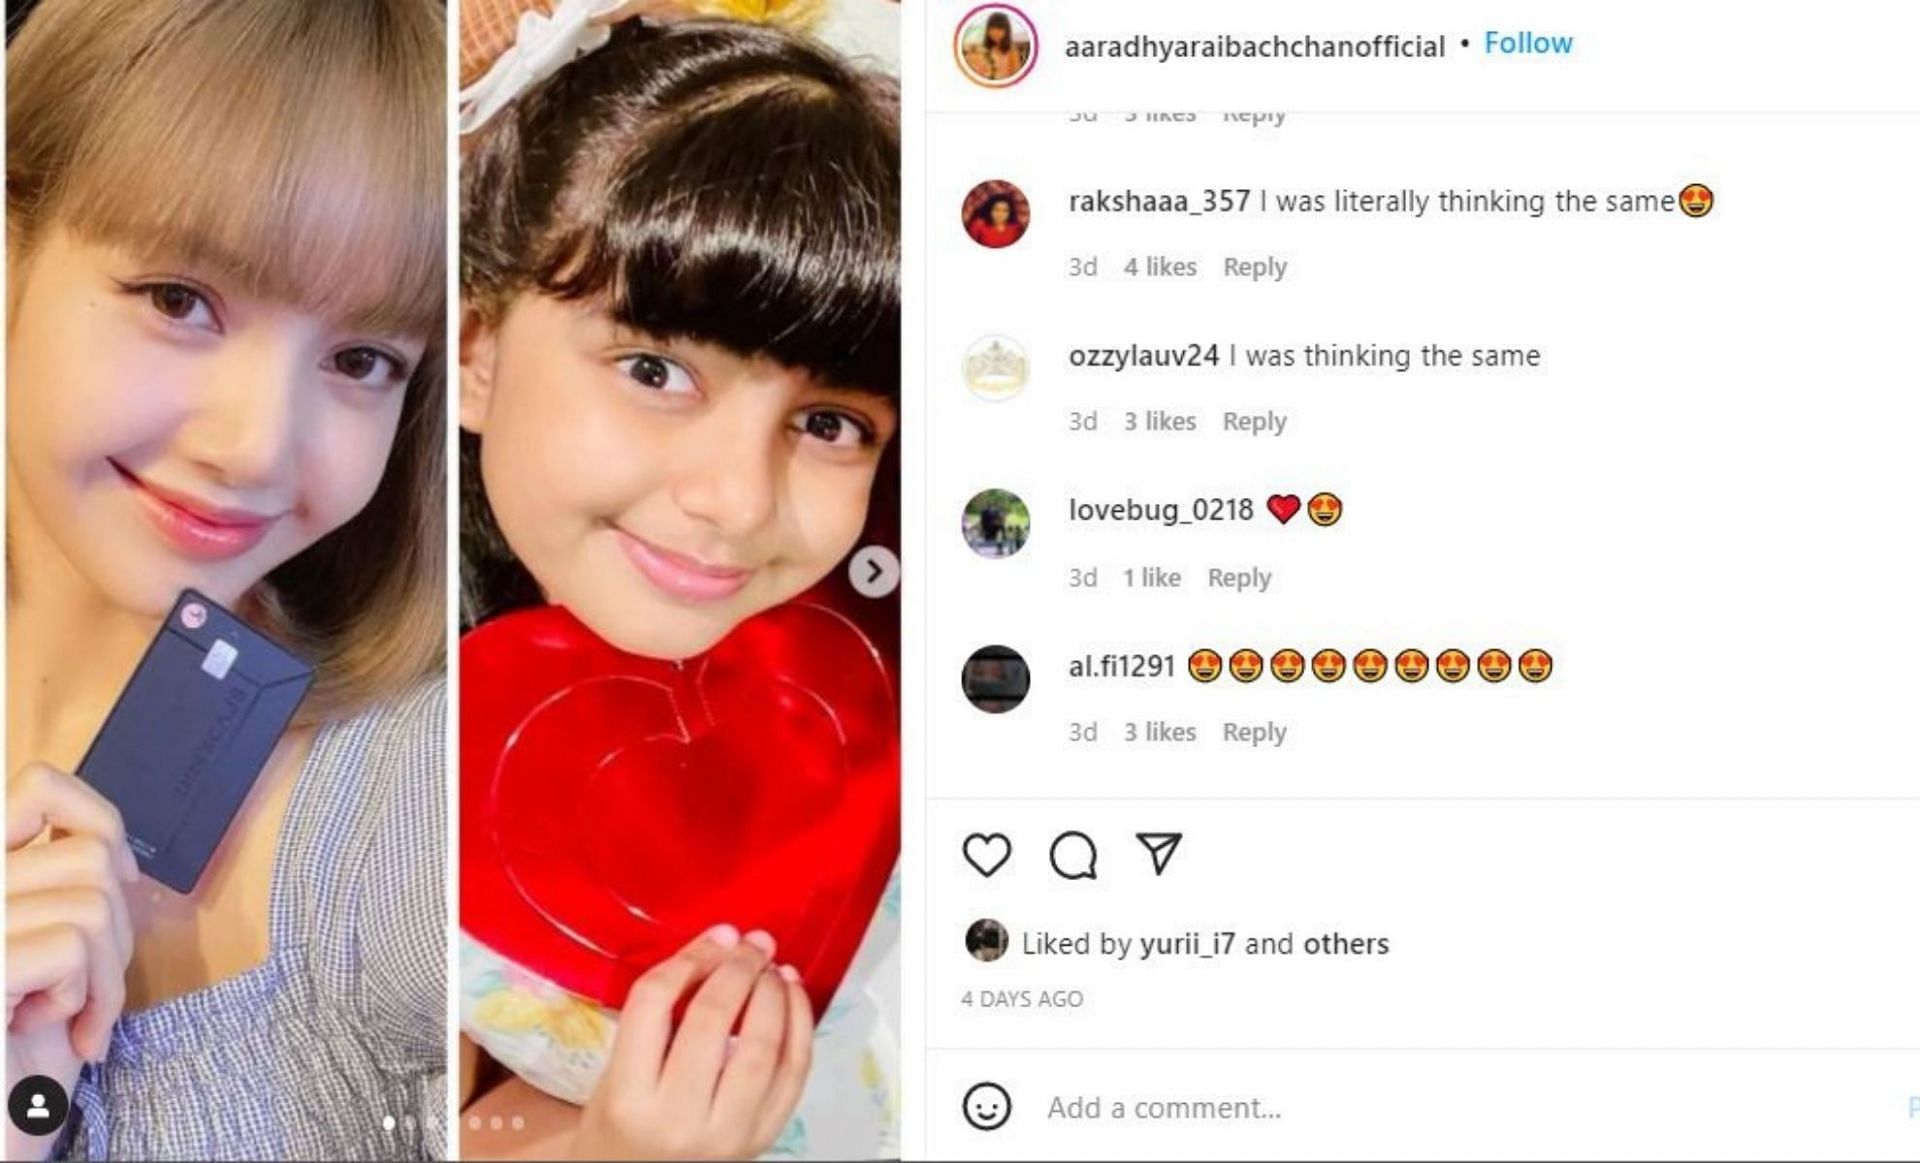 Comments under the collage post (Screenshot via @aaradhyaraibachchanofficial/Instagram)